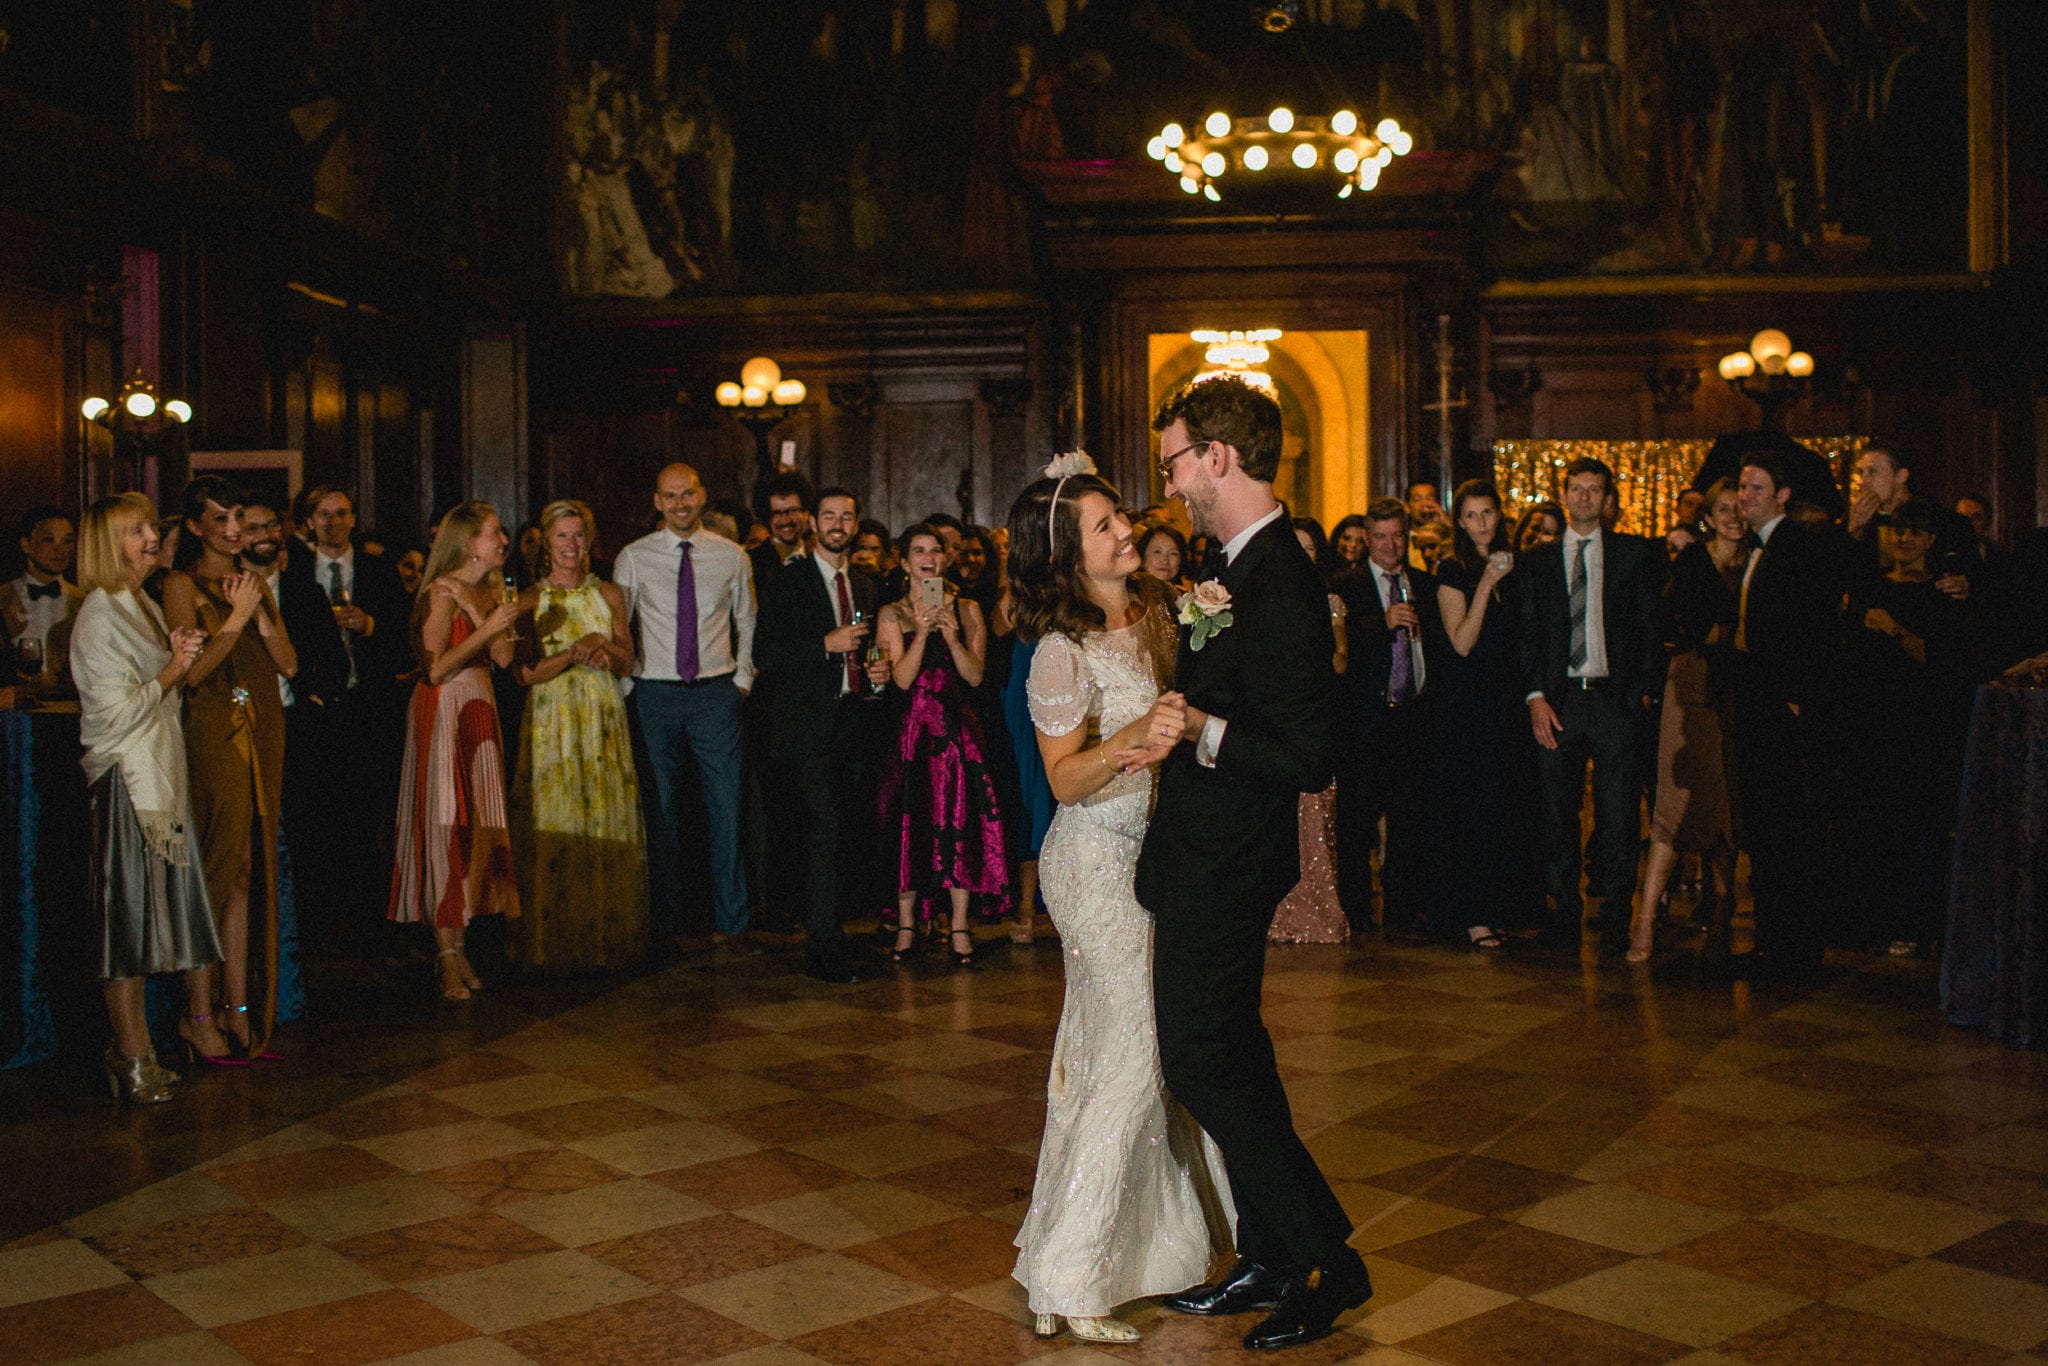 A bride and groom dancing in a dark wood paneled ballroom, surrounded by friends and family